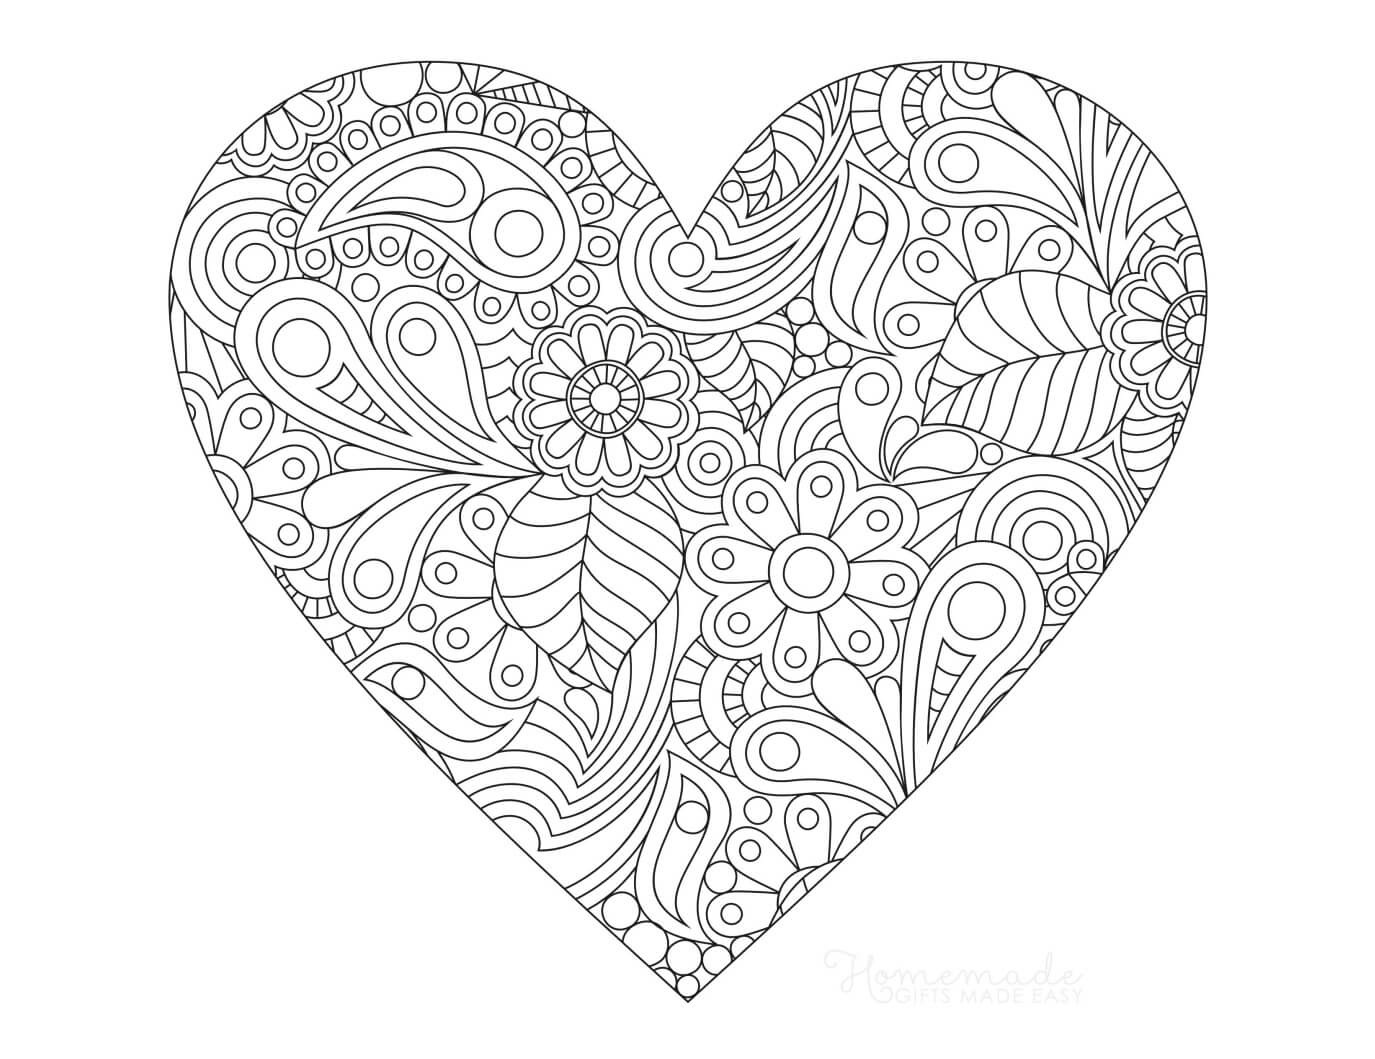 human heart coloring pages for adults | heart coloring pages printable | coloring pages of hearts and flowers